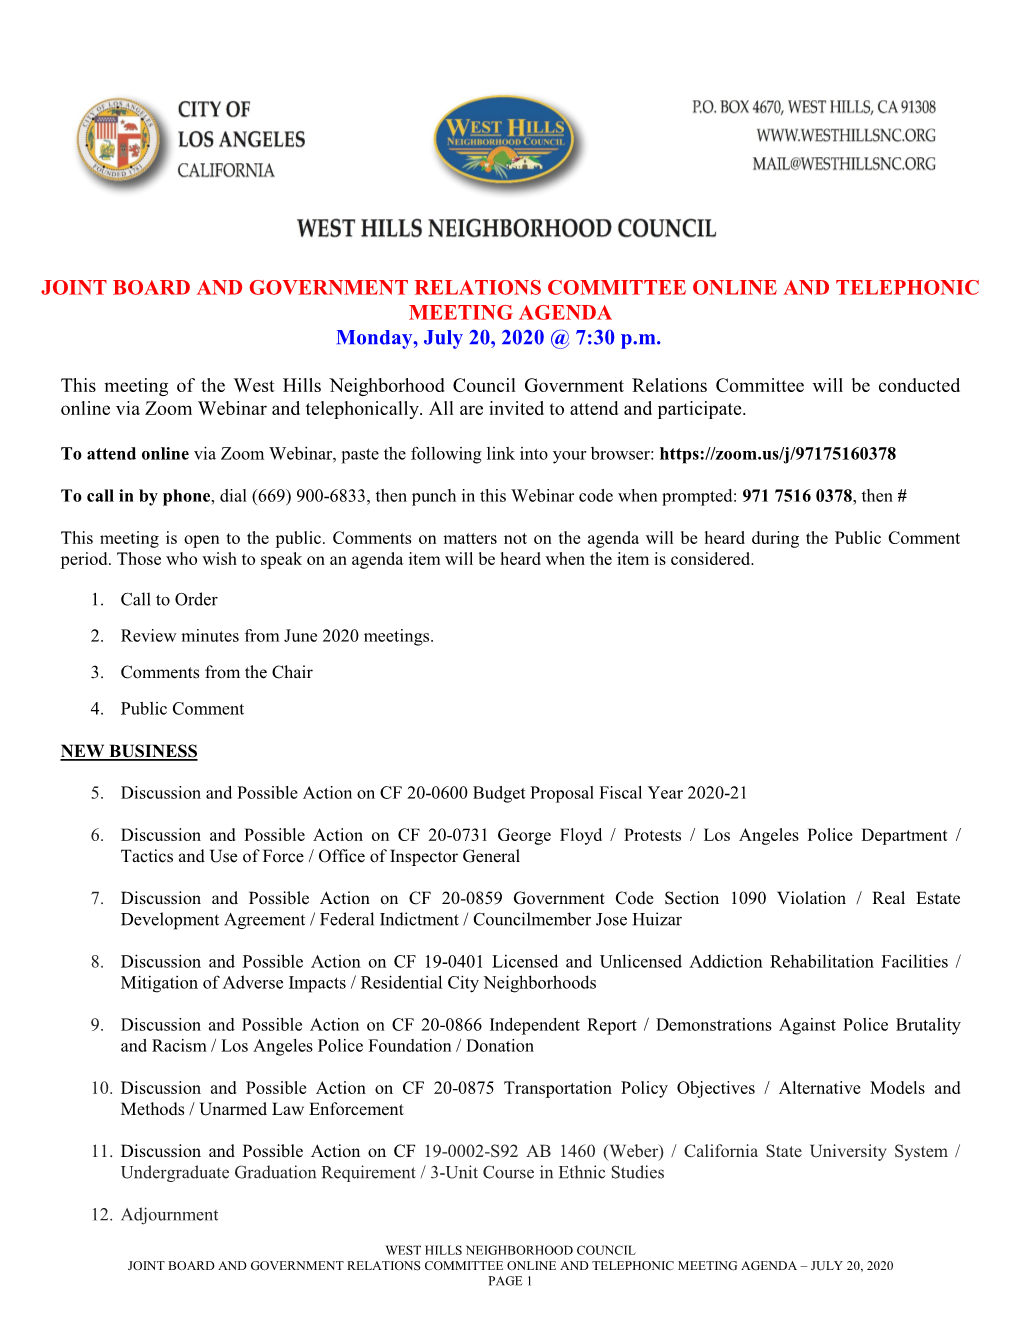 JOINT BOARD and GOVERNMENT RELATIONS COMMITTEE ONLINE and TELEPHONIC MEETING AGENDA Monday, July 20, 2020 @ 7:30 P.M